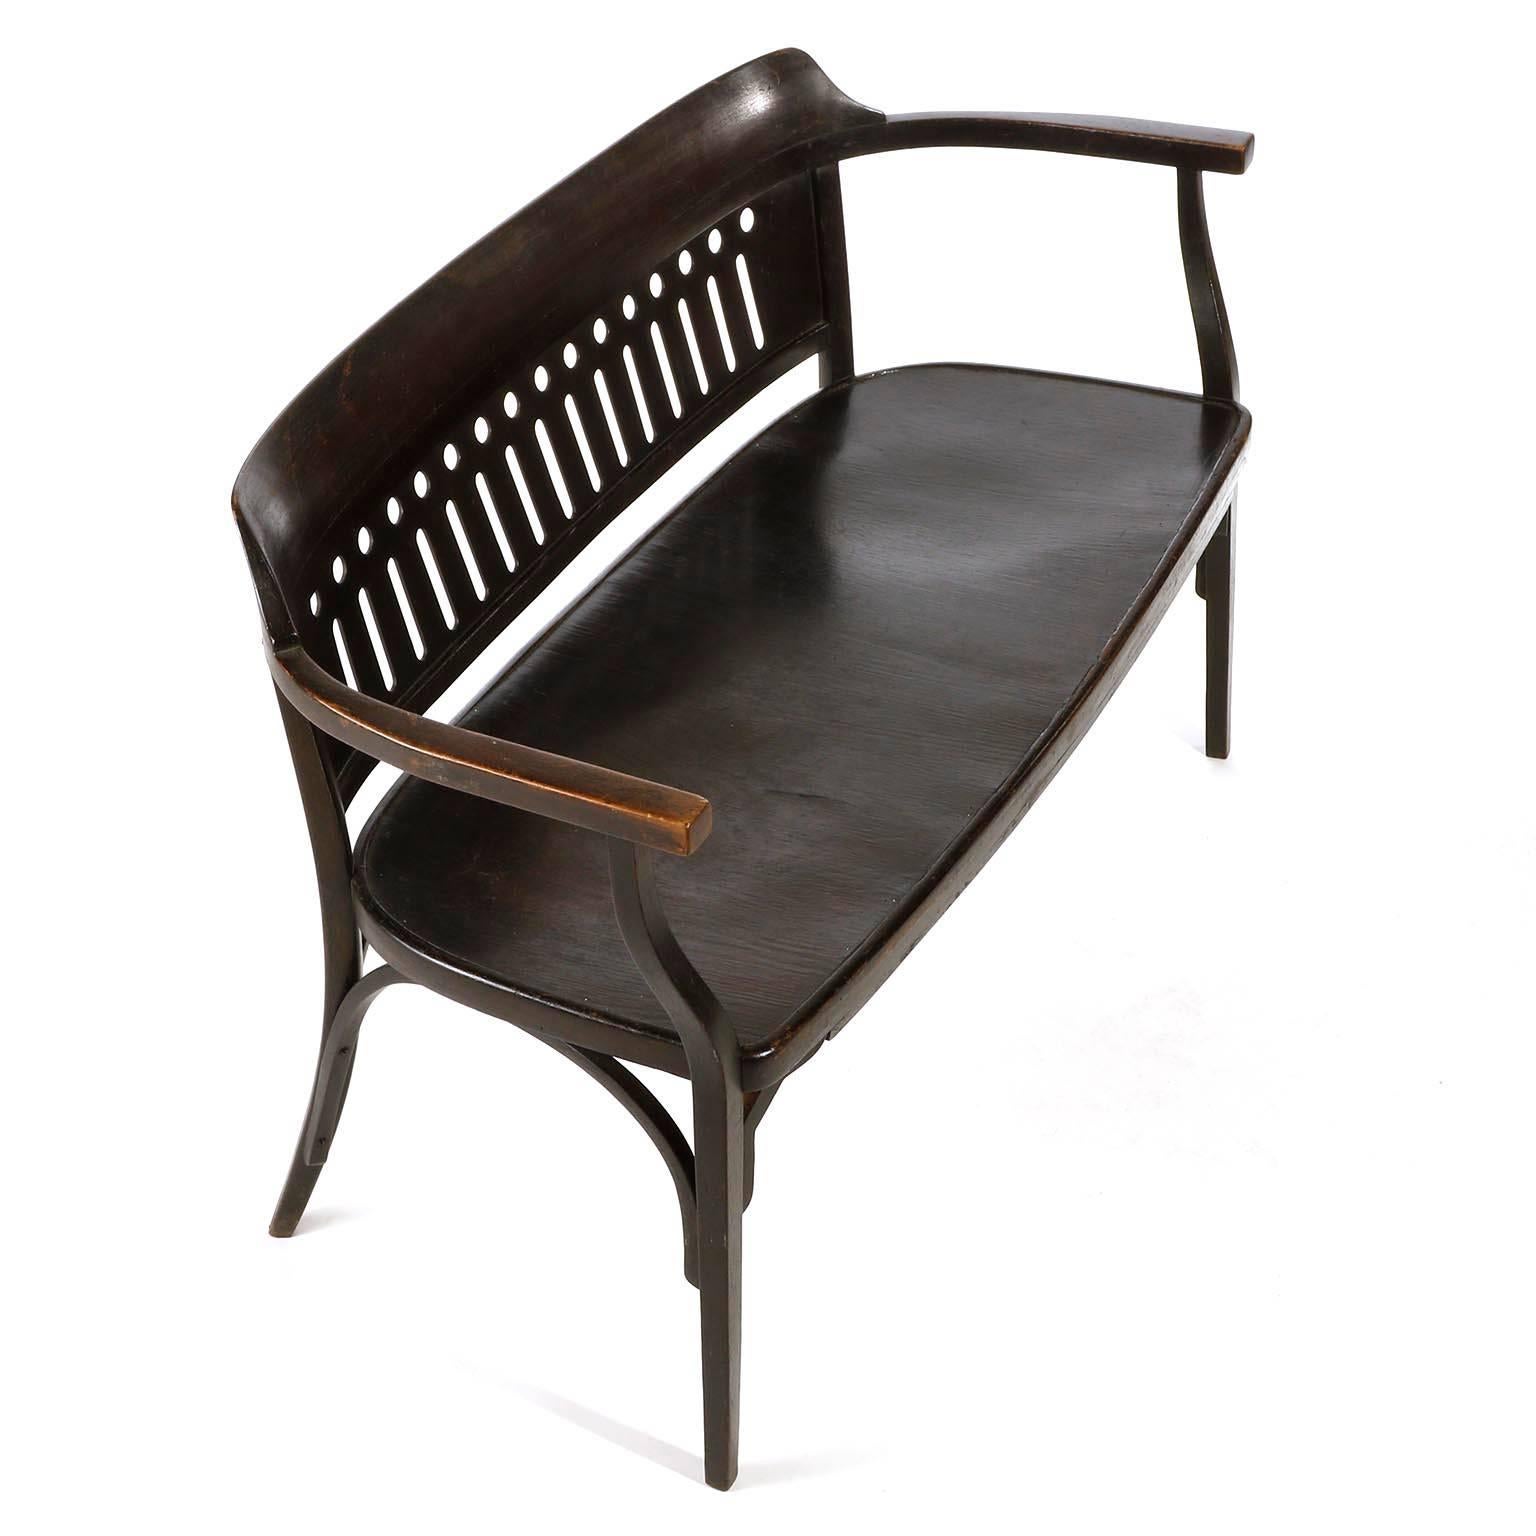 Beech Otto Wagner Settee Bench Bentwood, Thonet, Austria, Vienna Secession, circa 1905